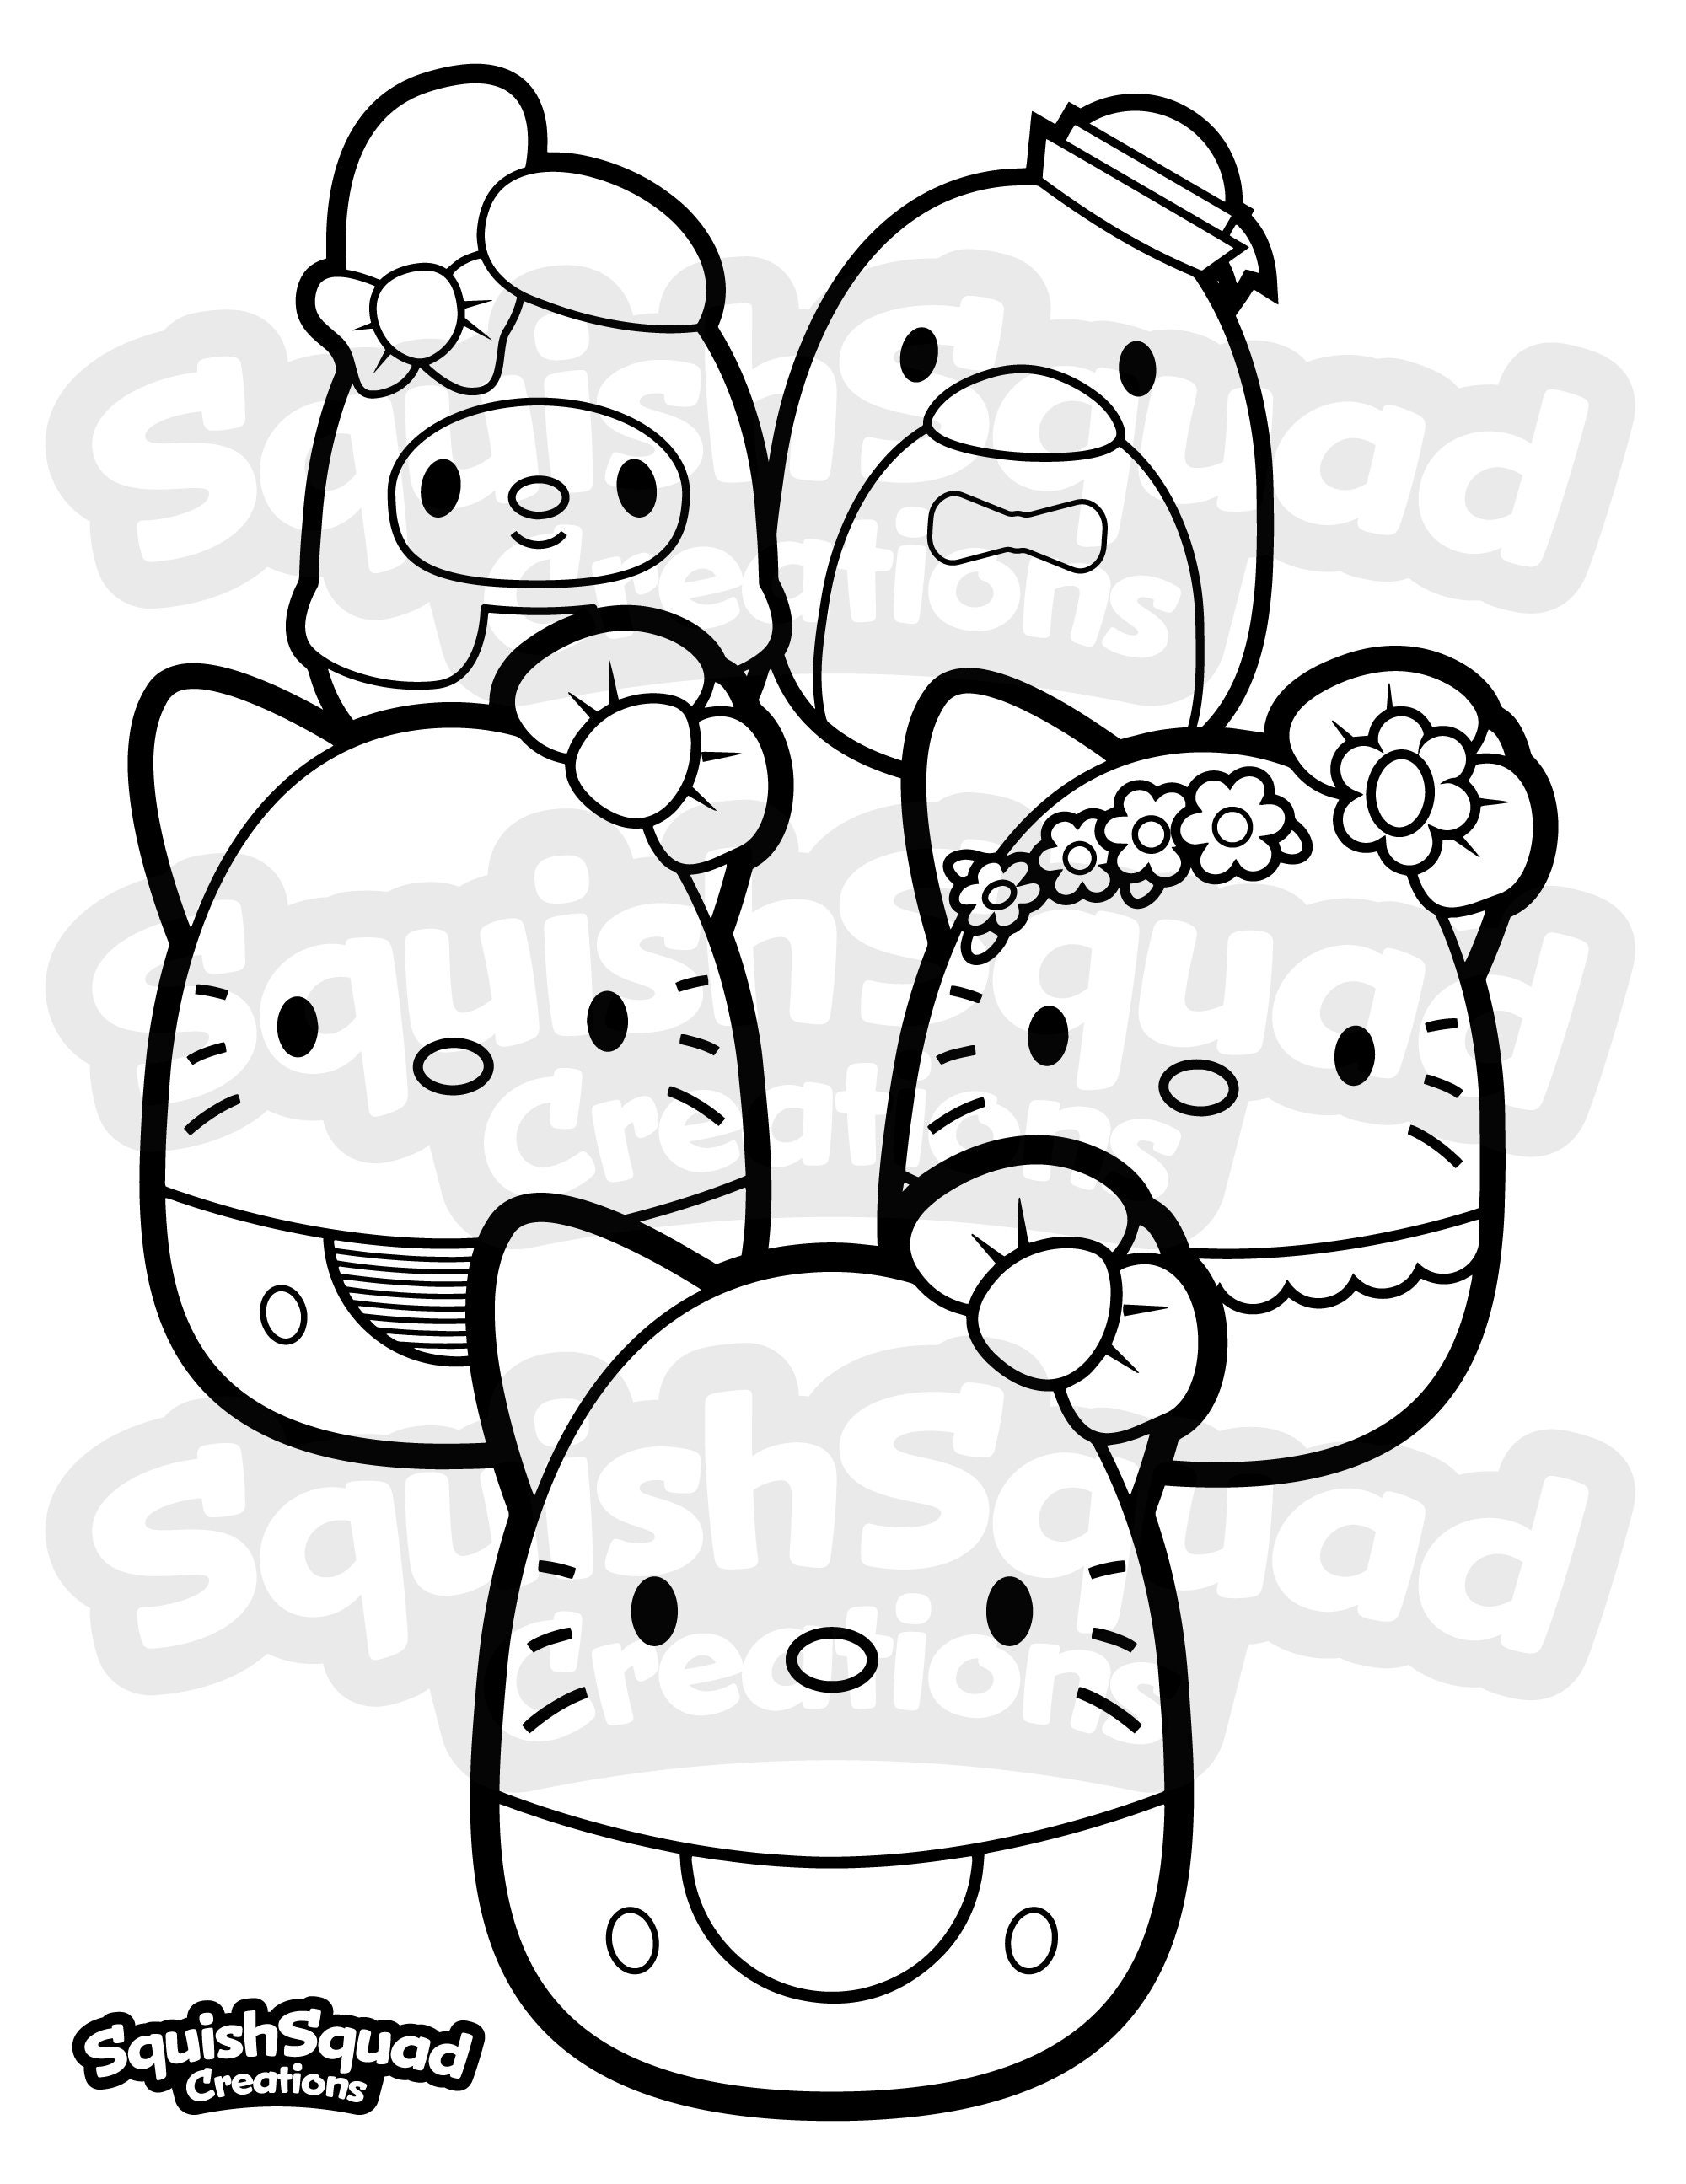 Squishmallow kitty coloring page printable squishmallow coloring page squishmallow downloadable coloring sheet coloring page for kids